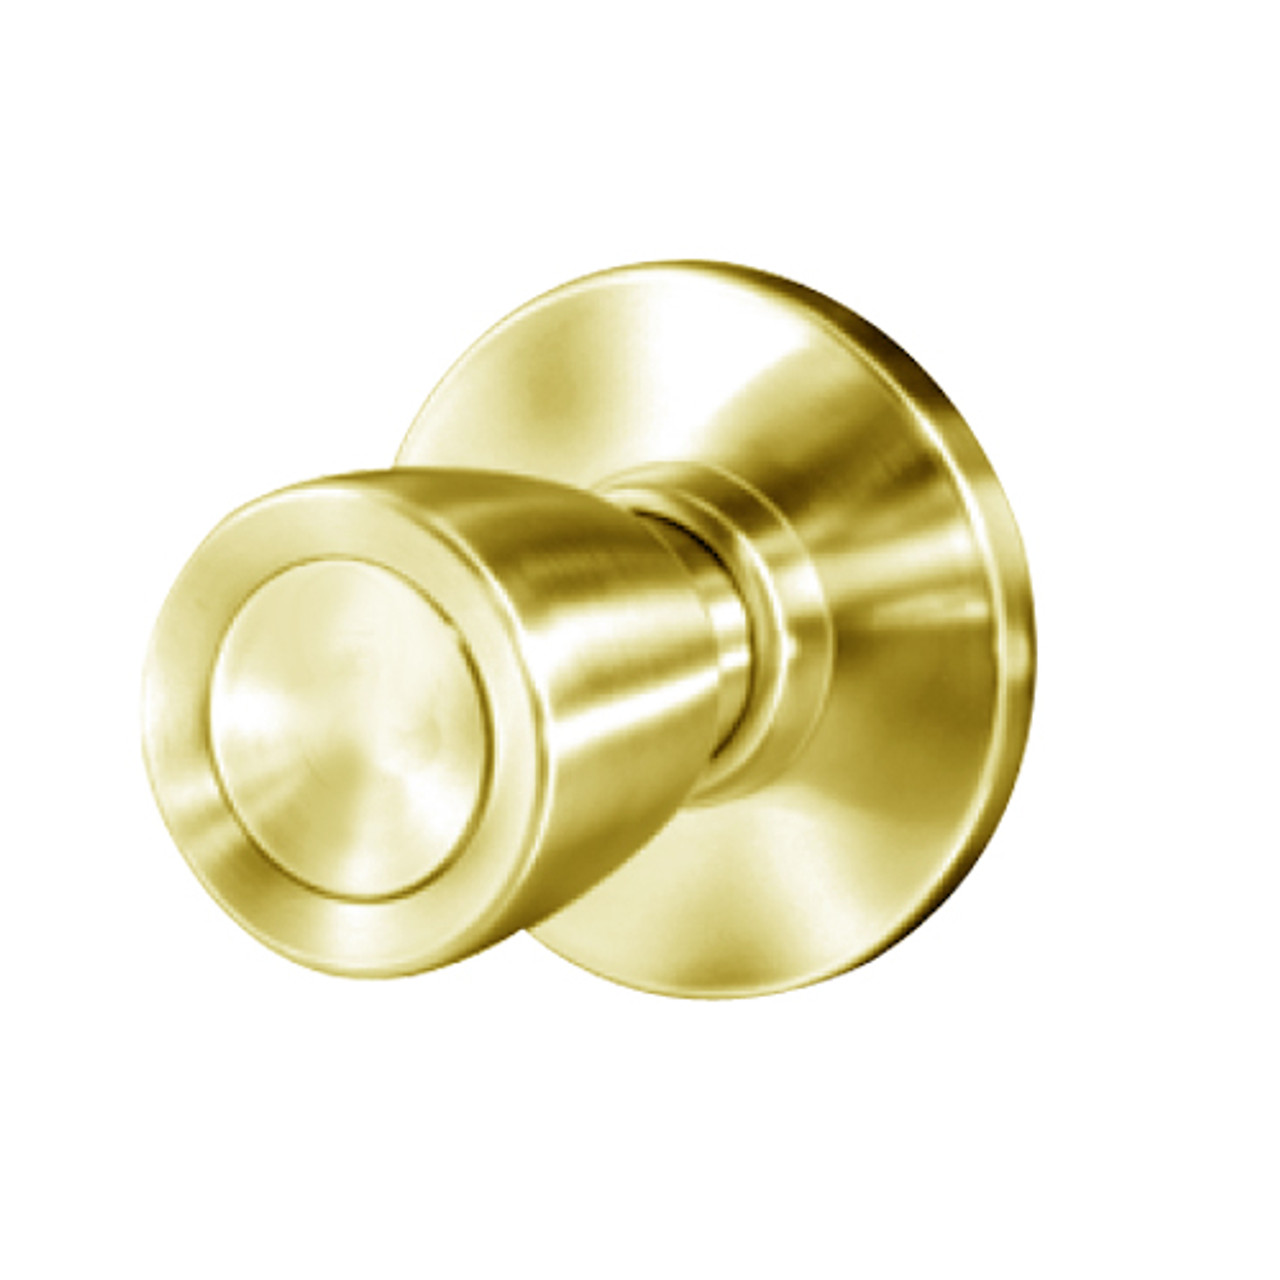 8K30Q6AS3605 Best 8K Series Exit Heavy Duty Cylindrical Knob Locks with Tulip Style in Bright Brass